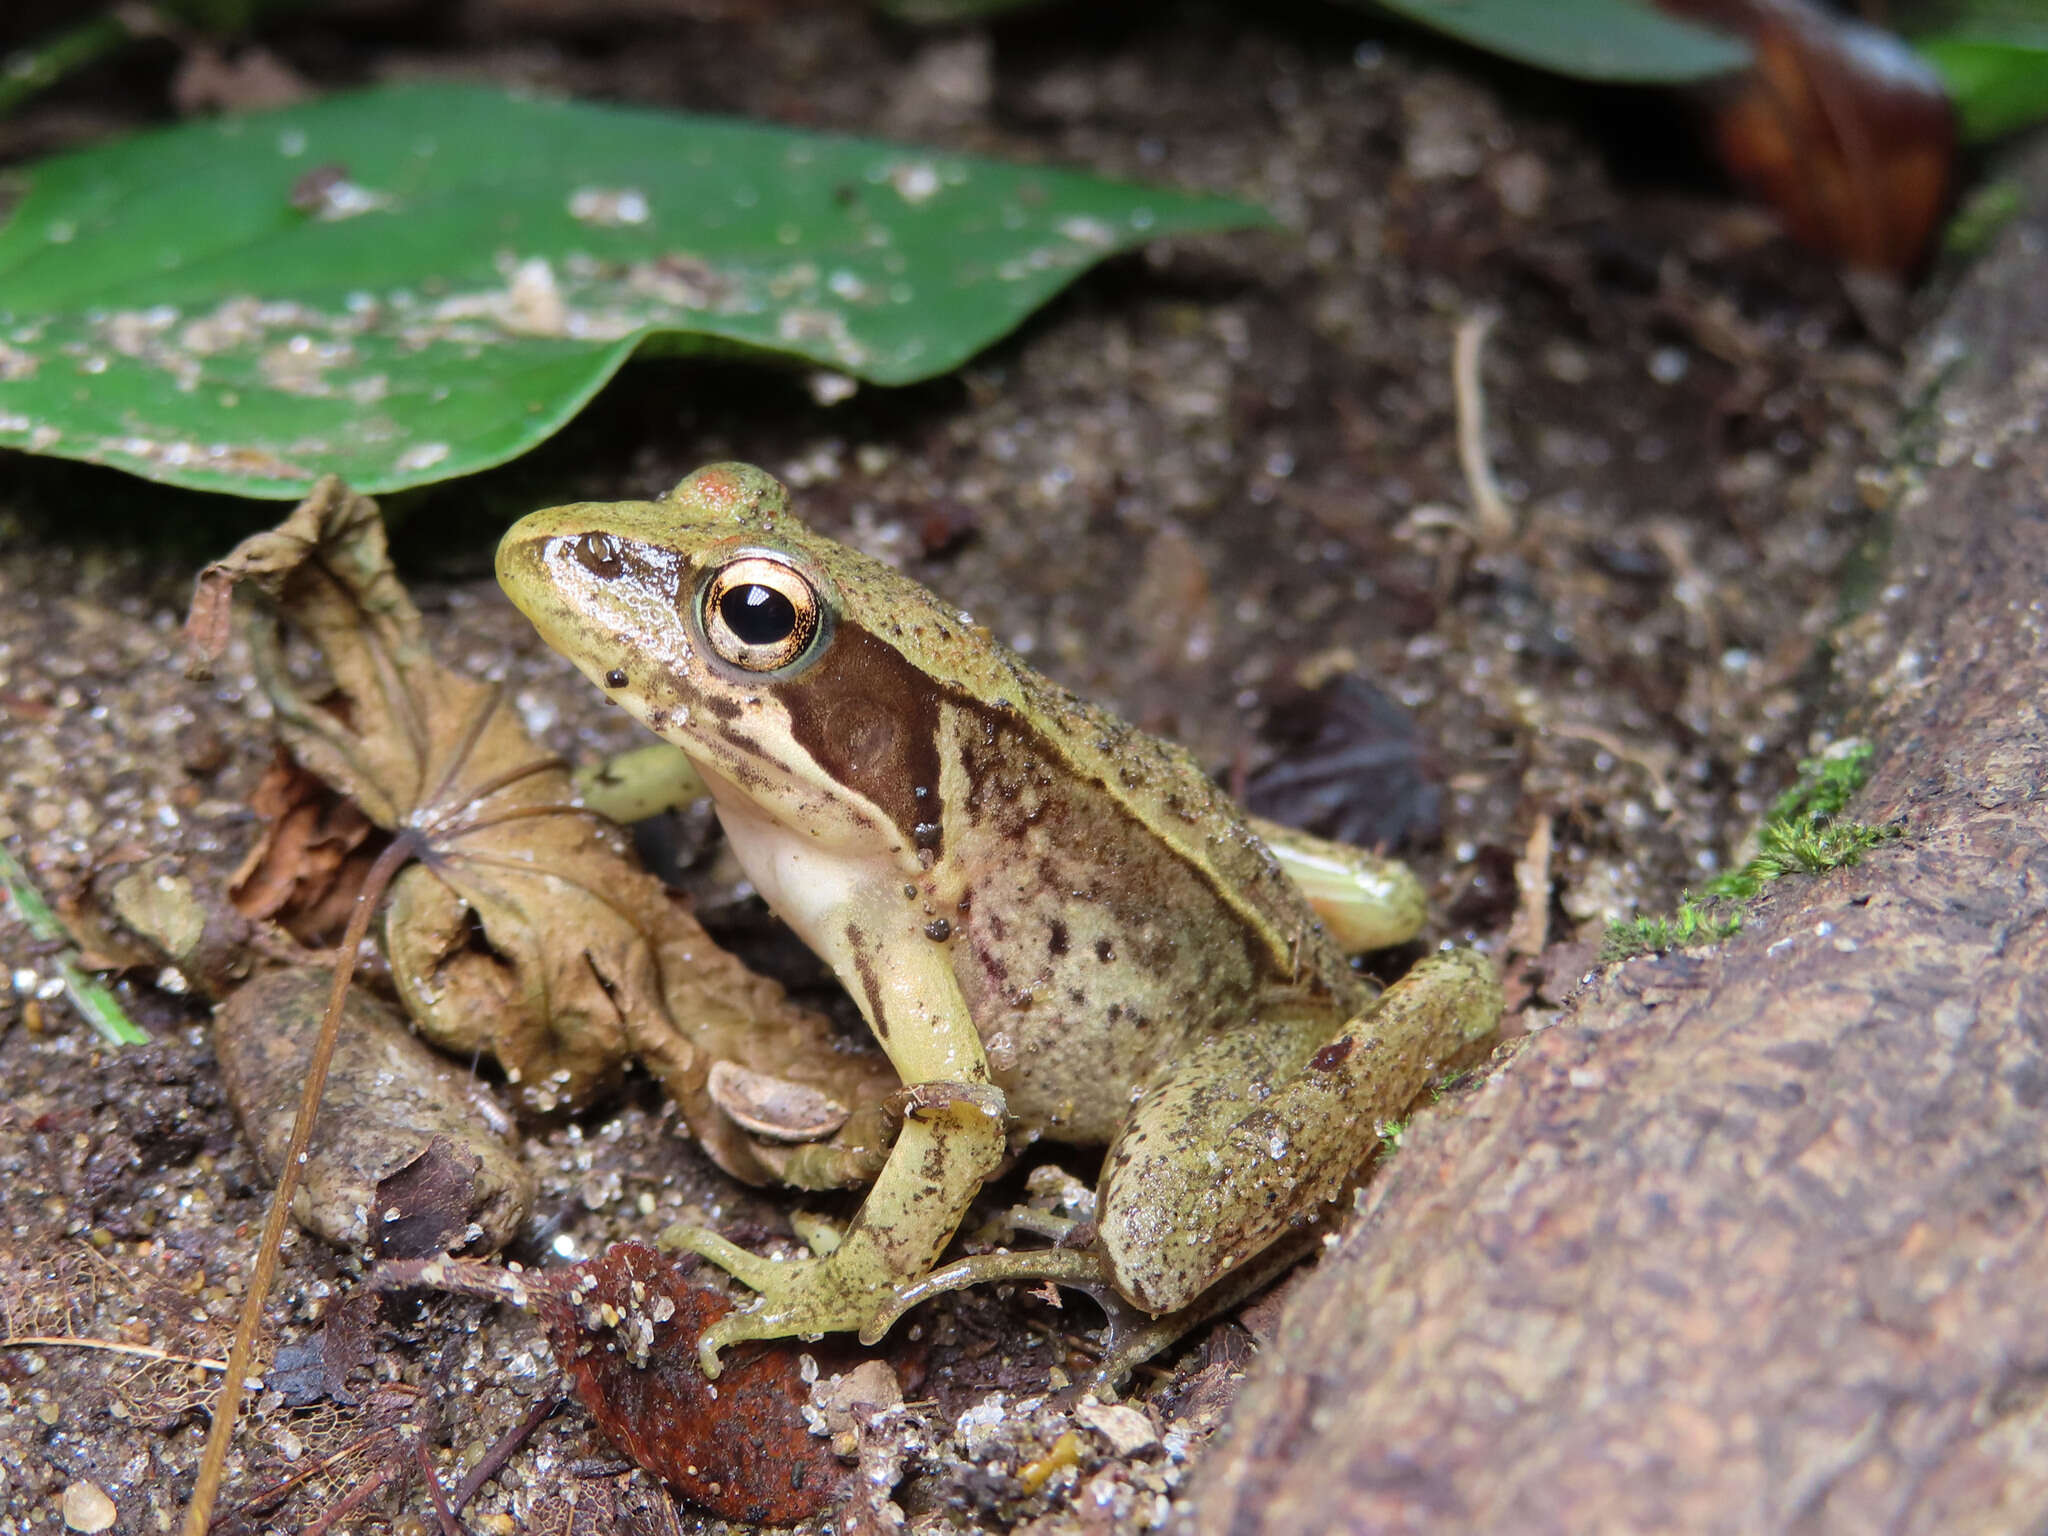 Image of Japanese Brown Frog